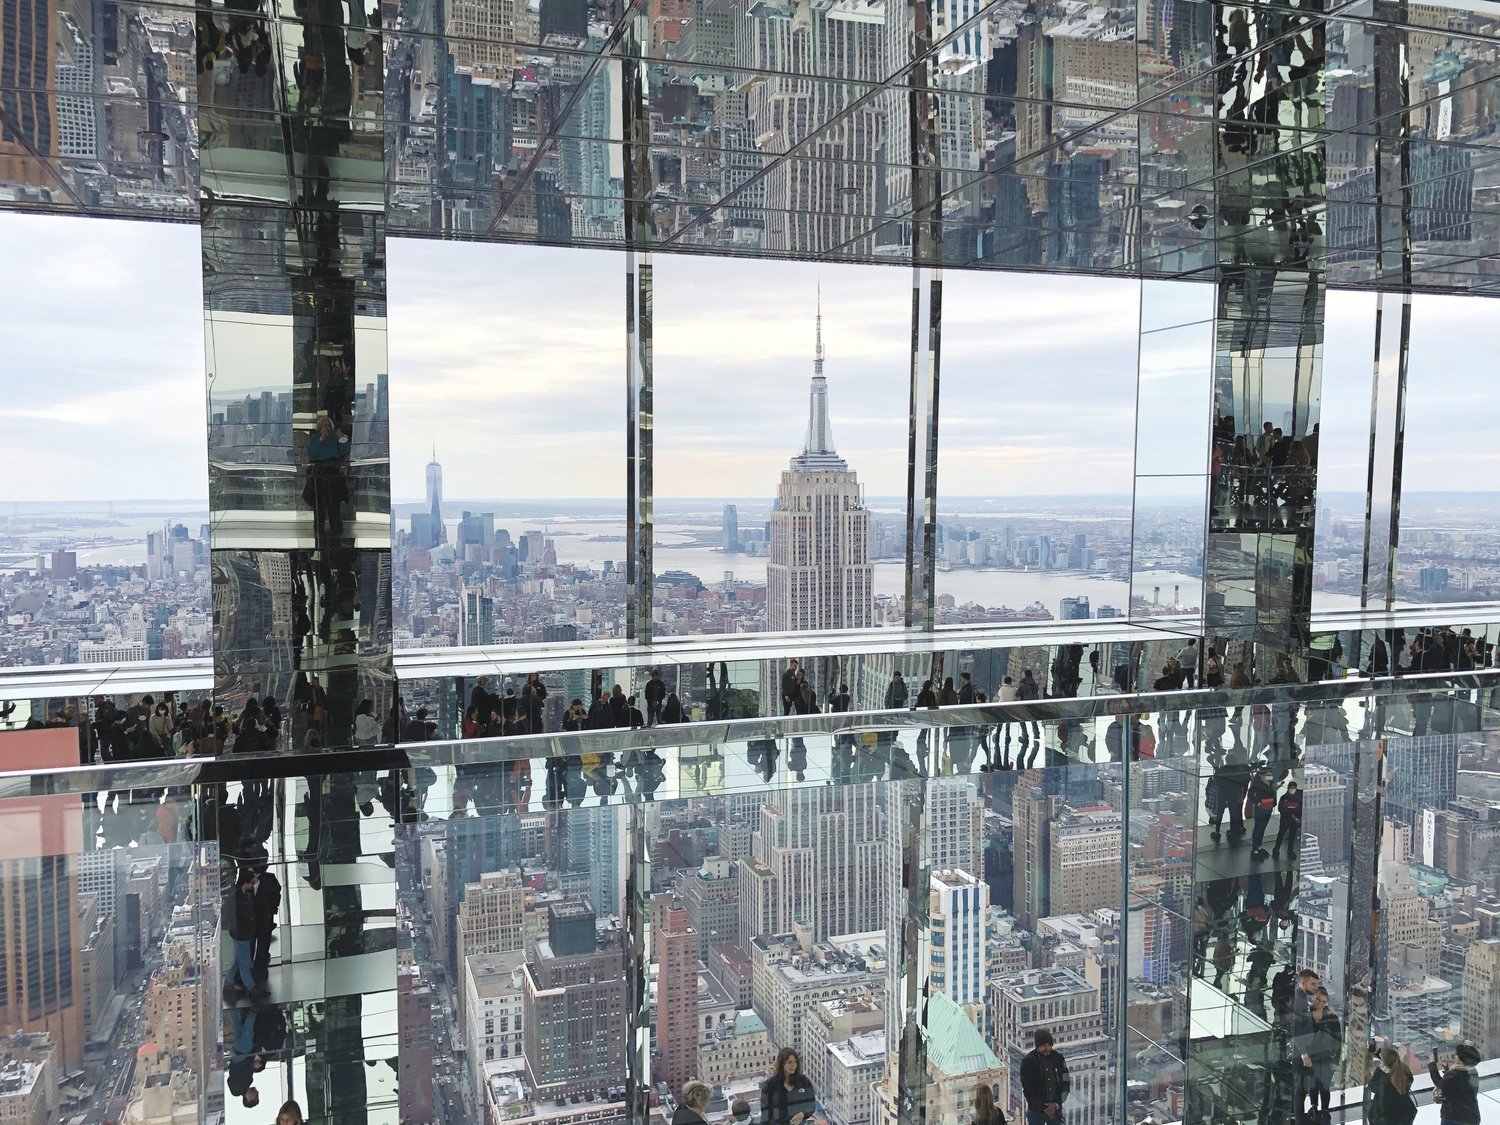 The view from the three-story glass and mirror observation deck at Summit One Vanderbilt in Manhattan.